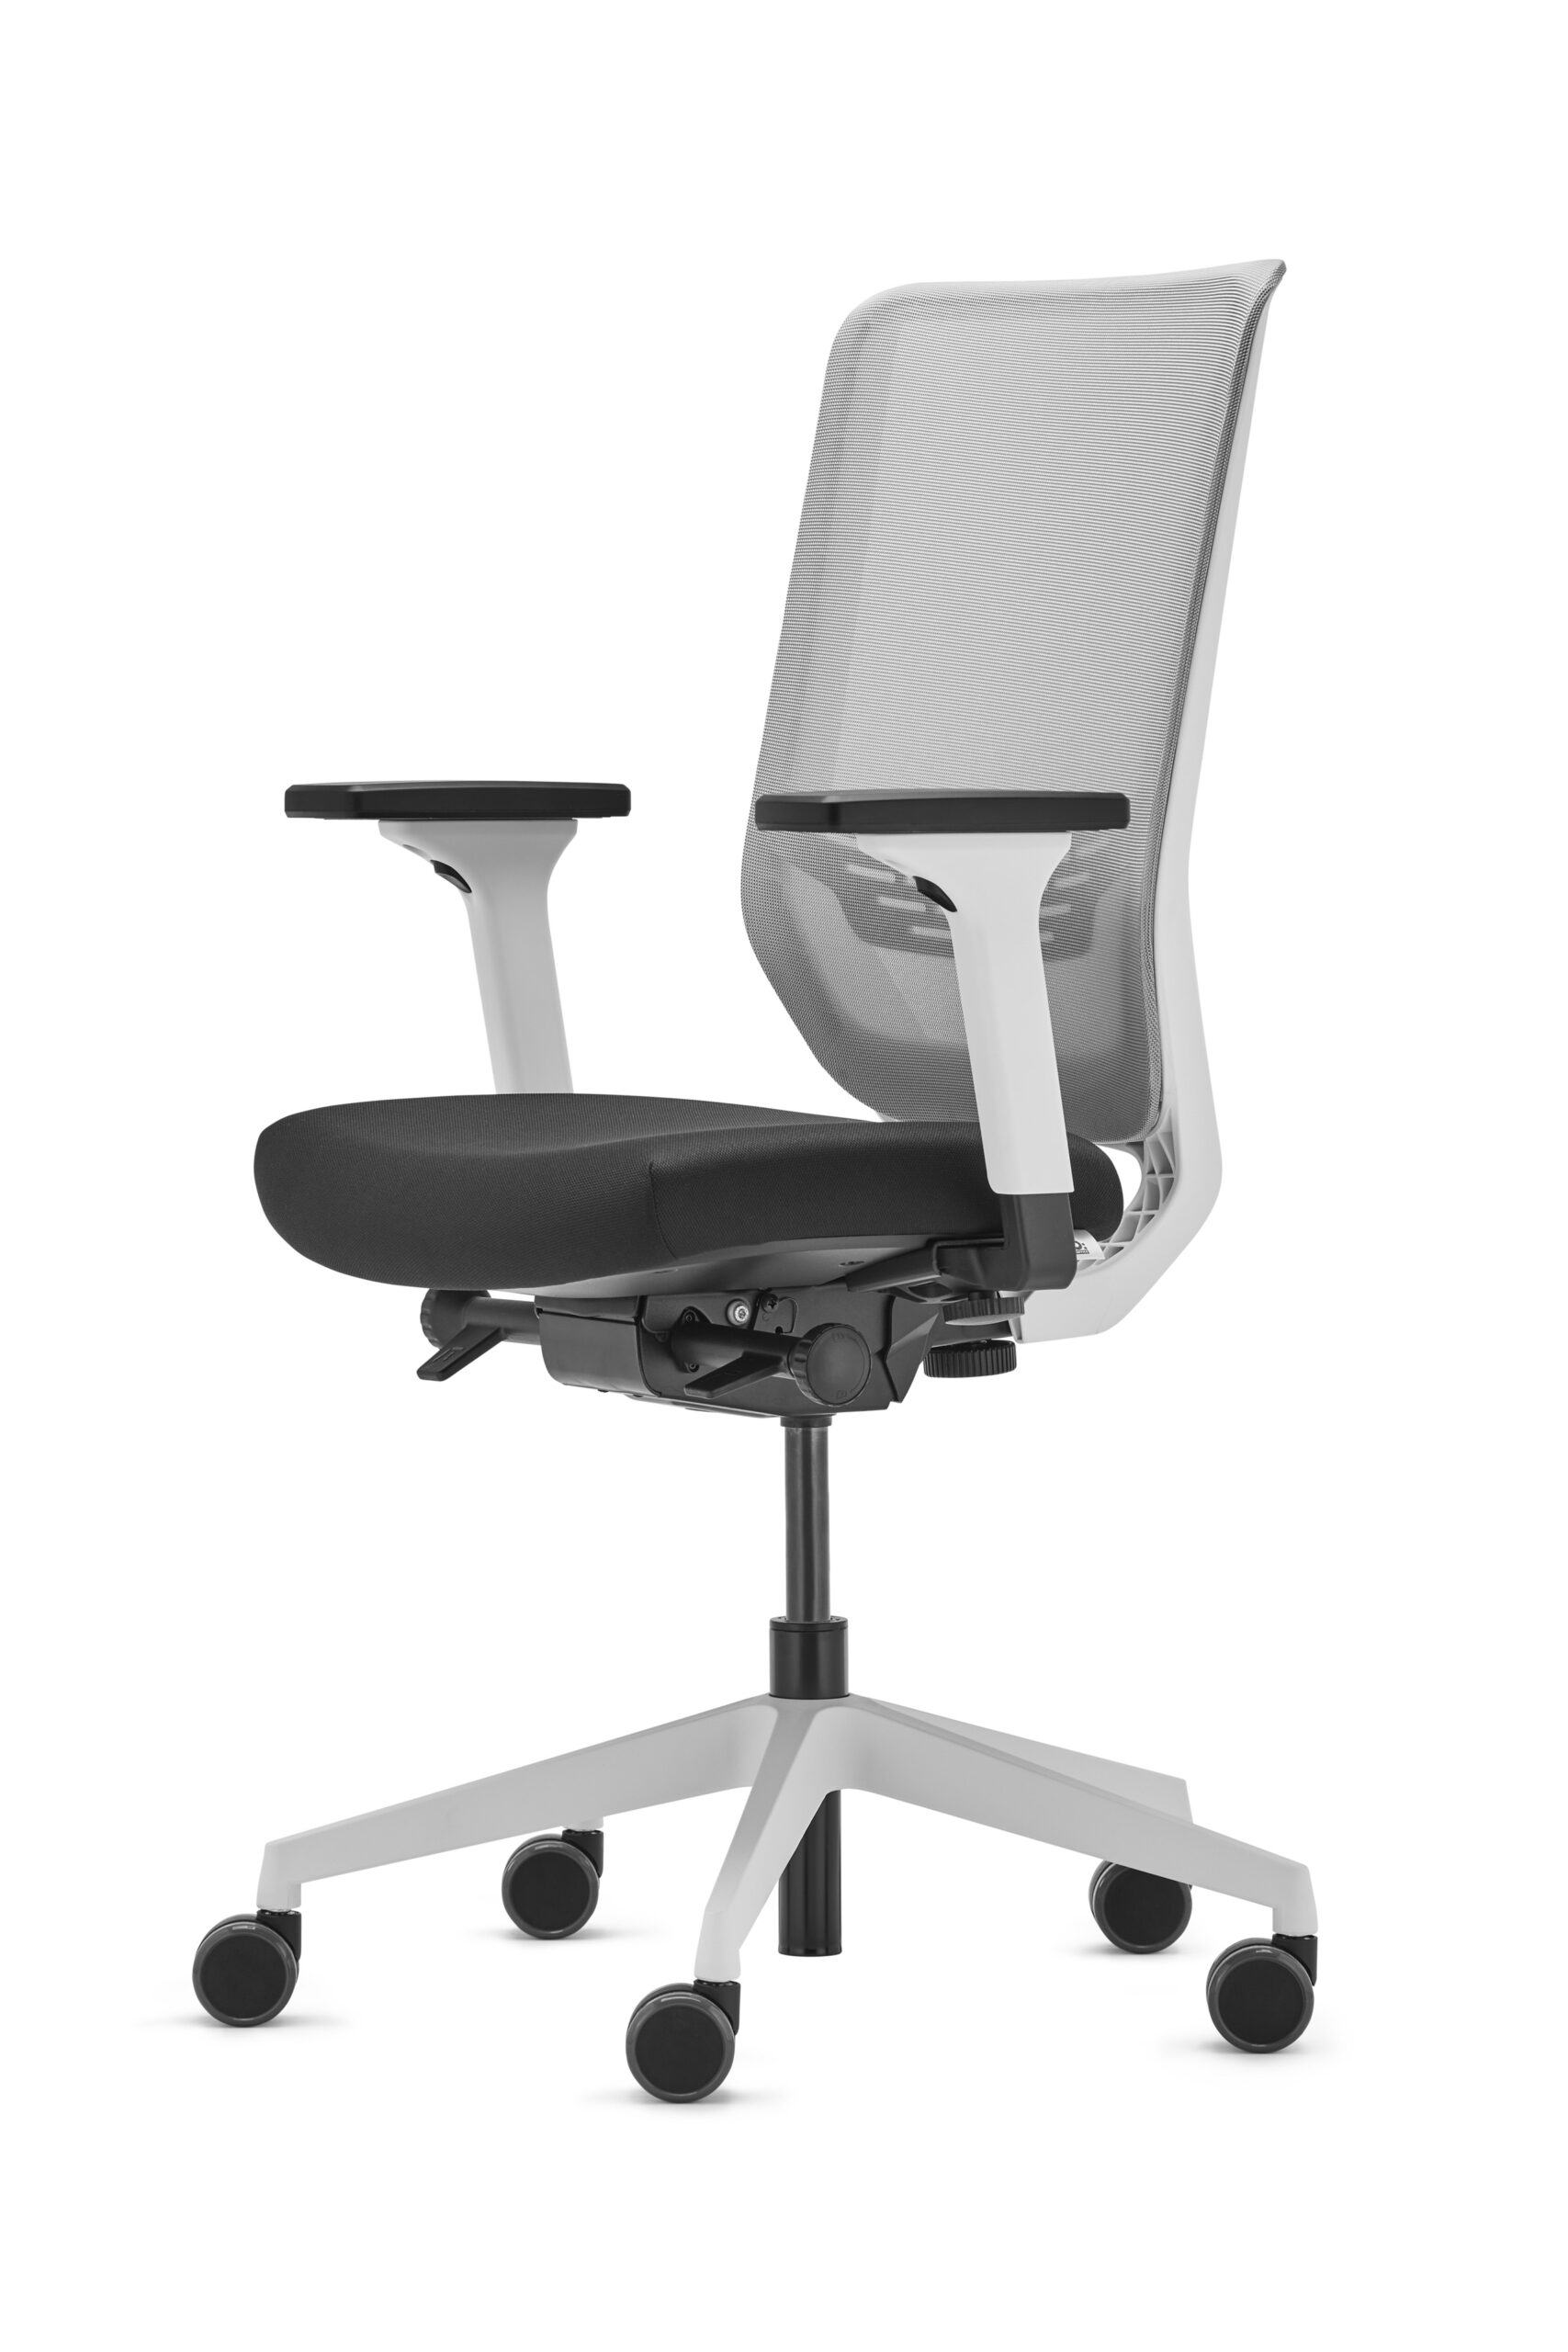 fauteuil-to-sync-white-mesh-pro